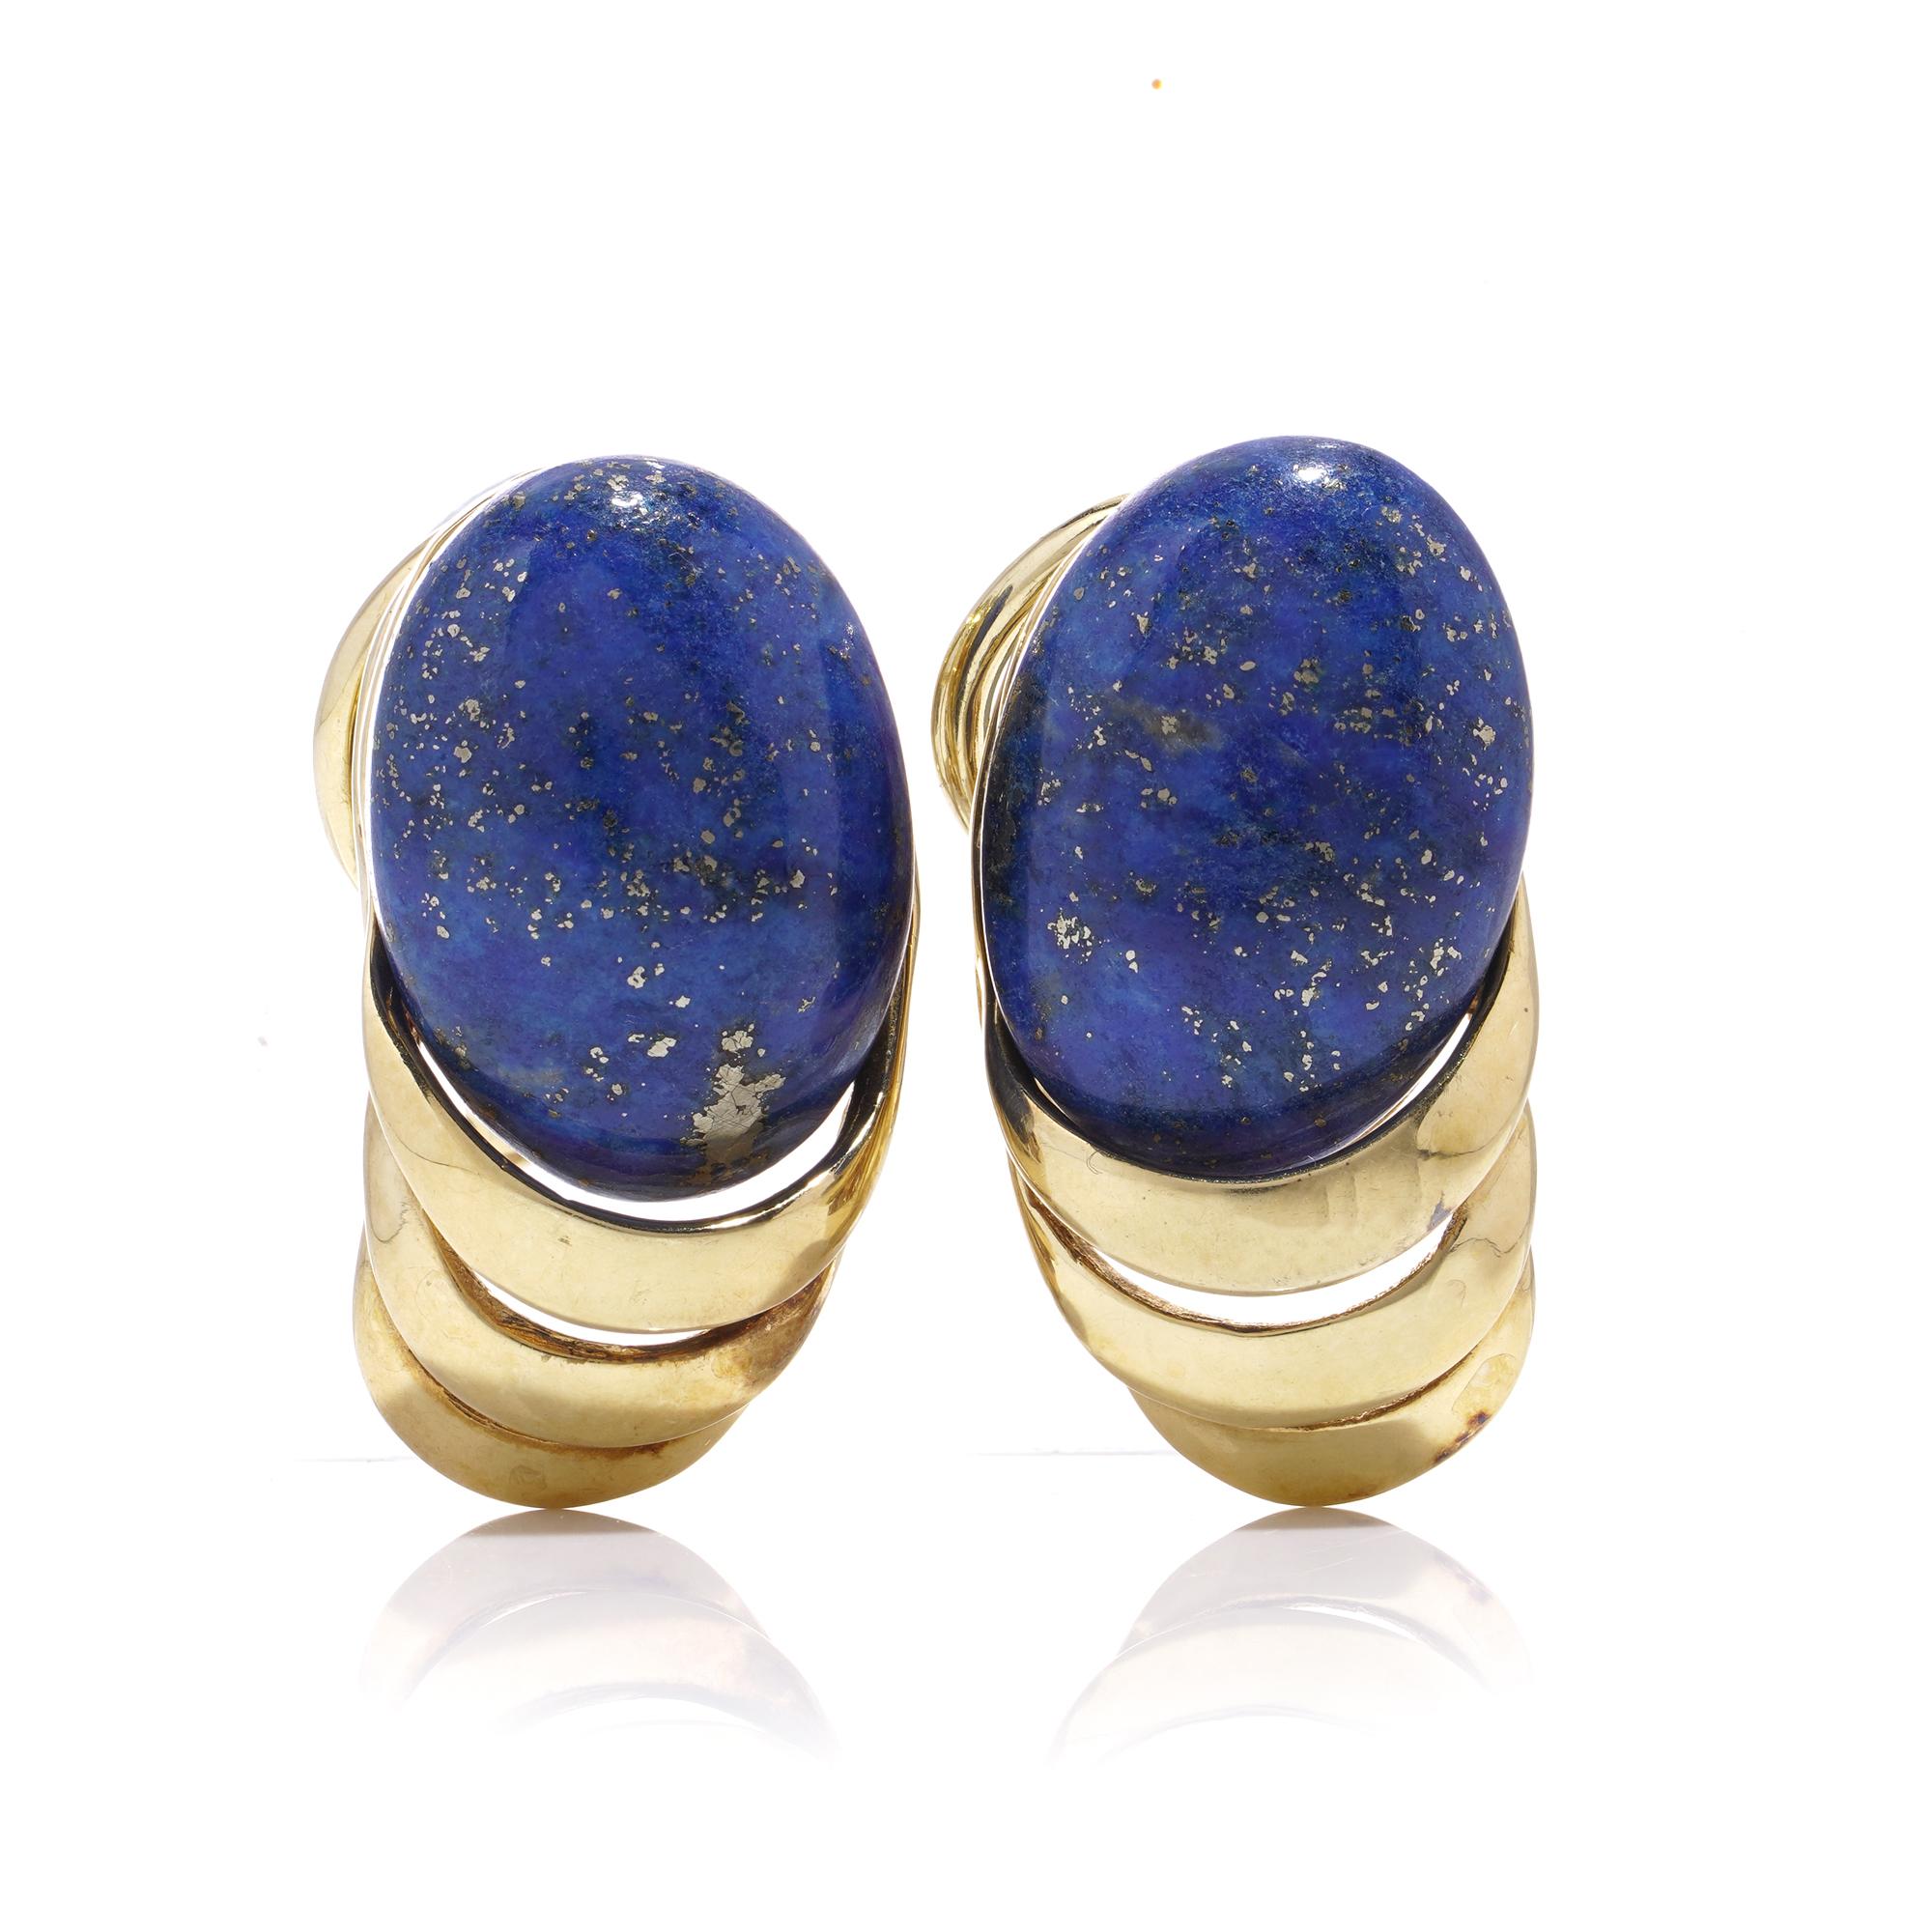  14kt Yellow Gold Clip-On Stud Earrings with Oval Cabochon Lapis Lazuli In Good Condition For Sale In Braintree, GB